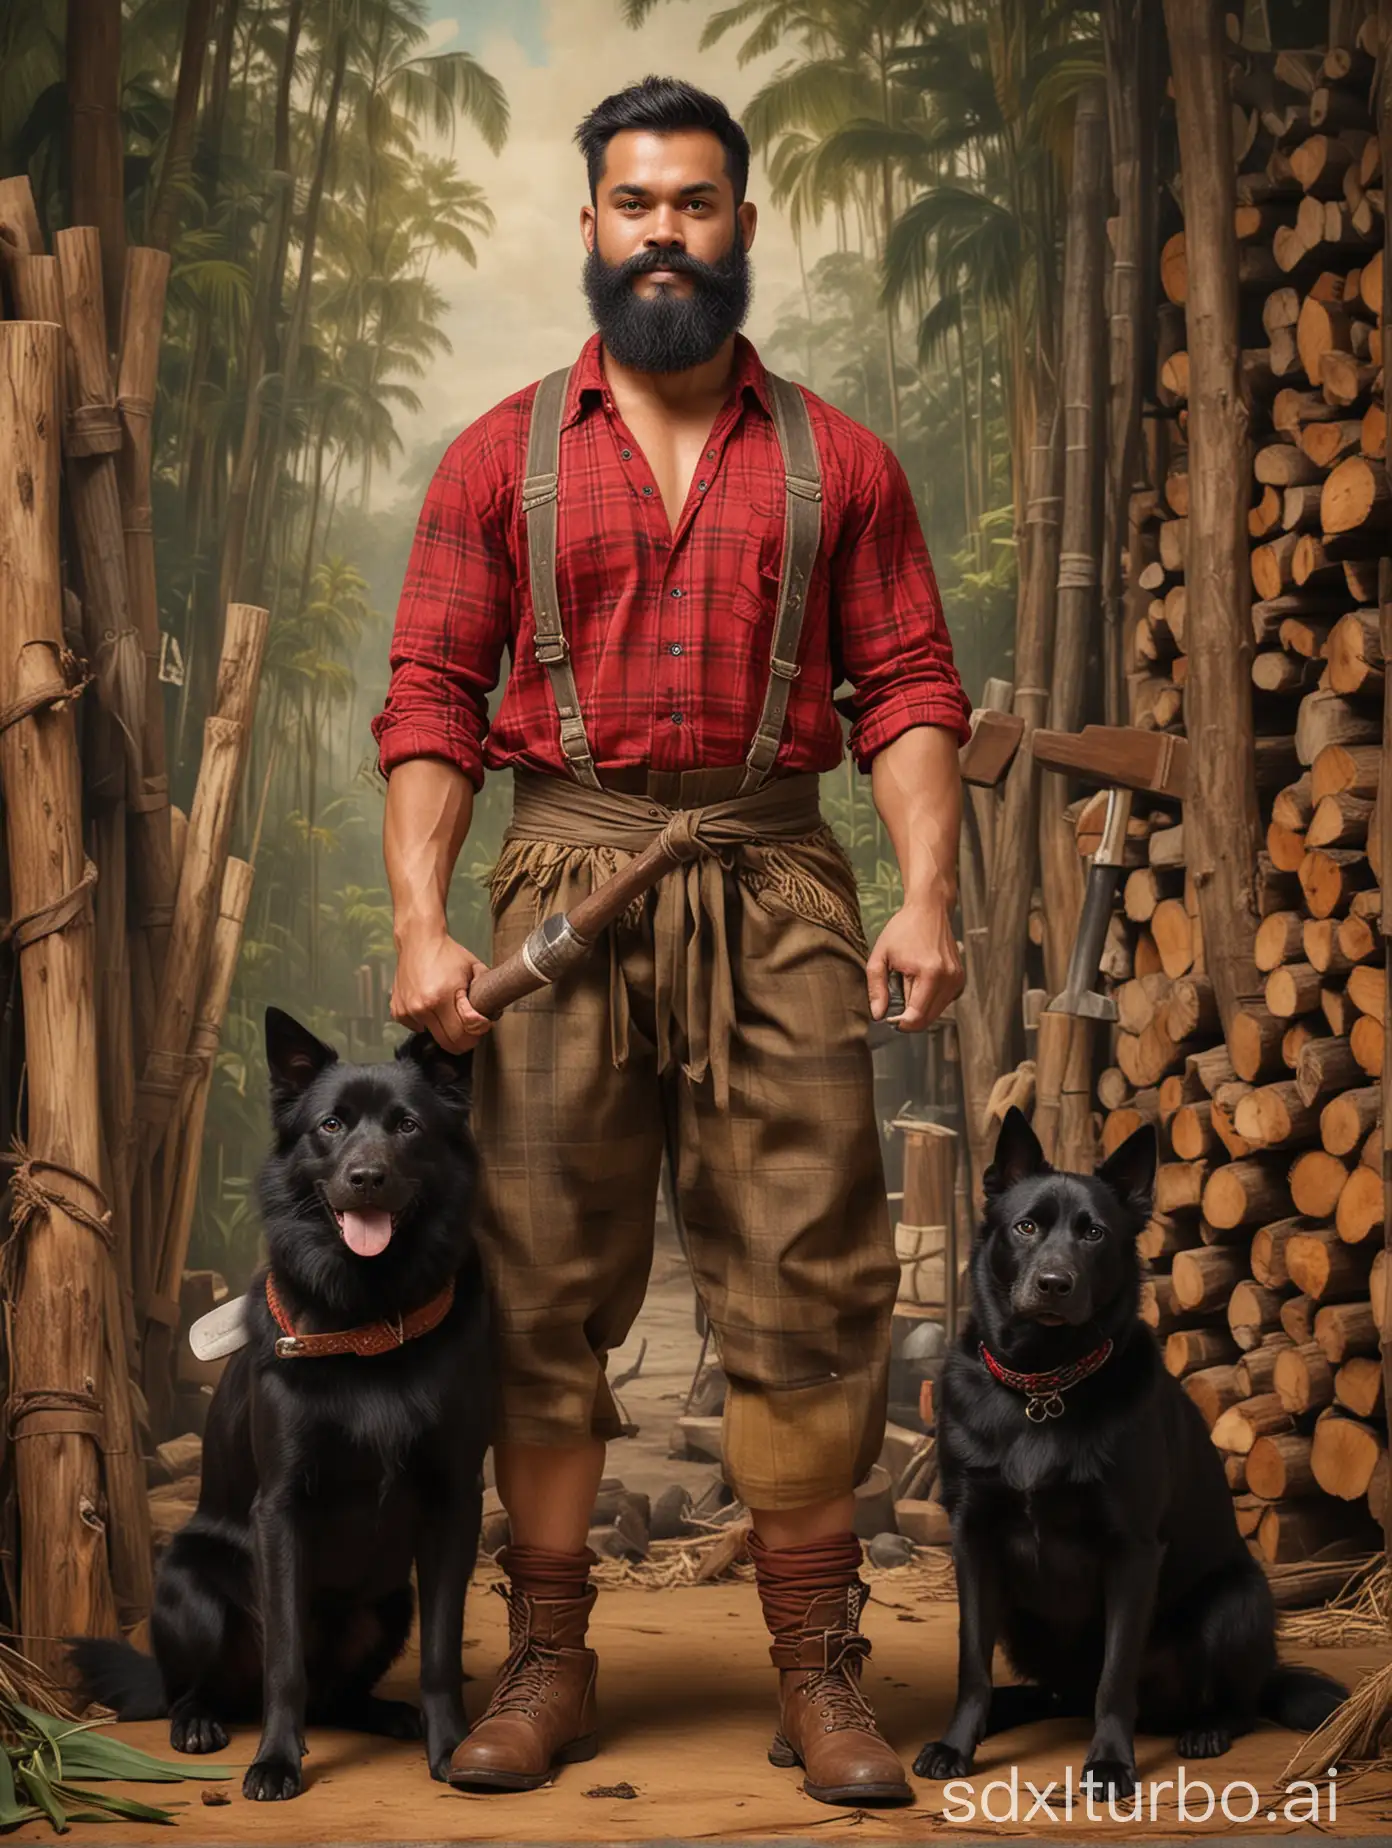 Strongman-in-Balinese-Lumberjack-Costume-with-Axe-and-Dog